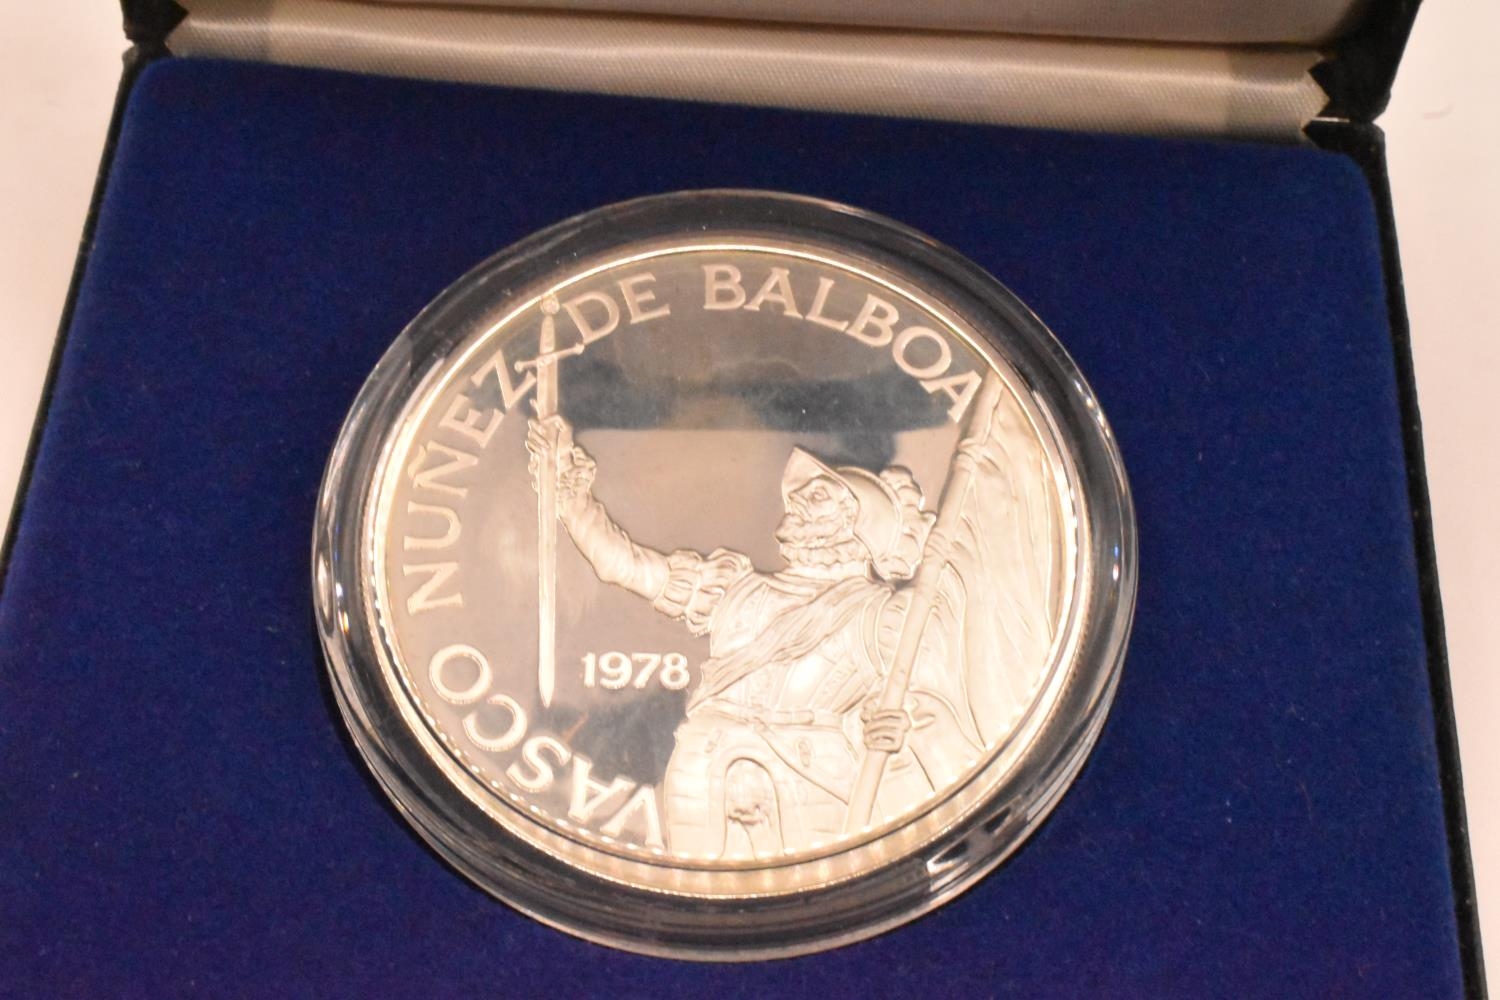 Republic of Panama - Silver 20 Balboas, 1978, in presentation case with certificates, - Image 2 of 3